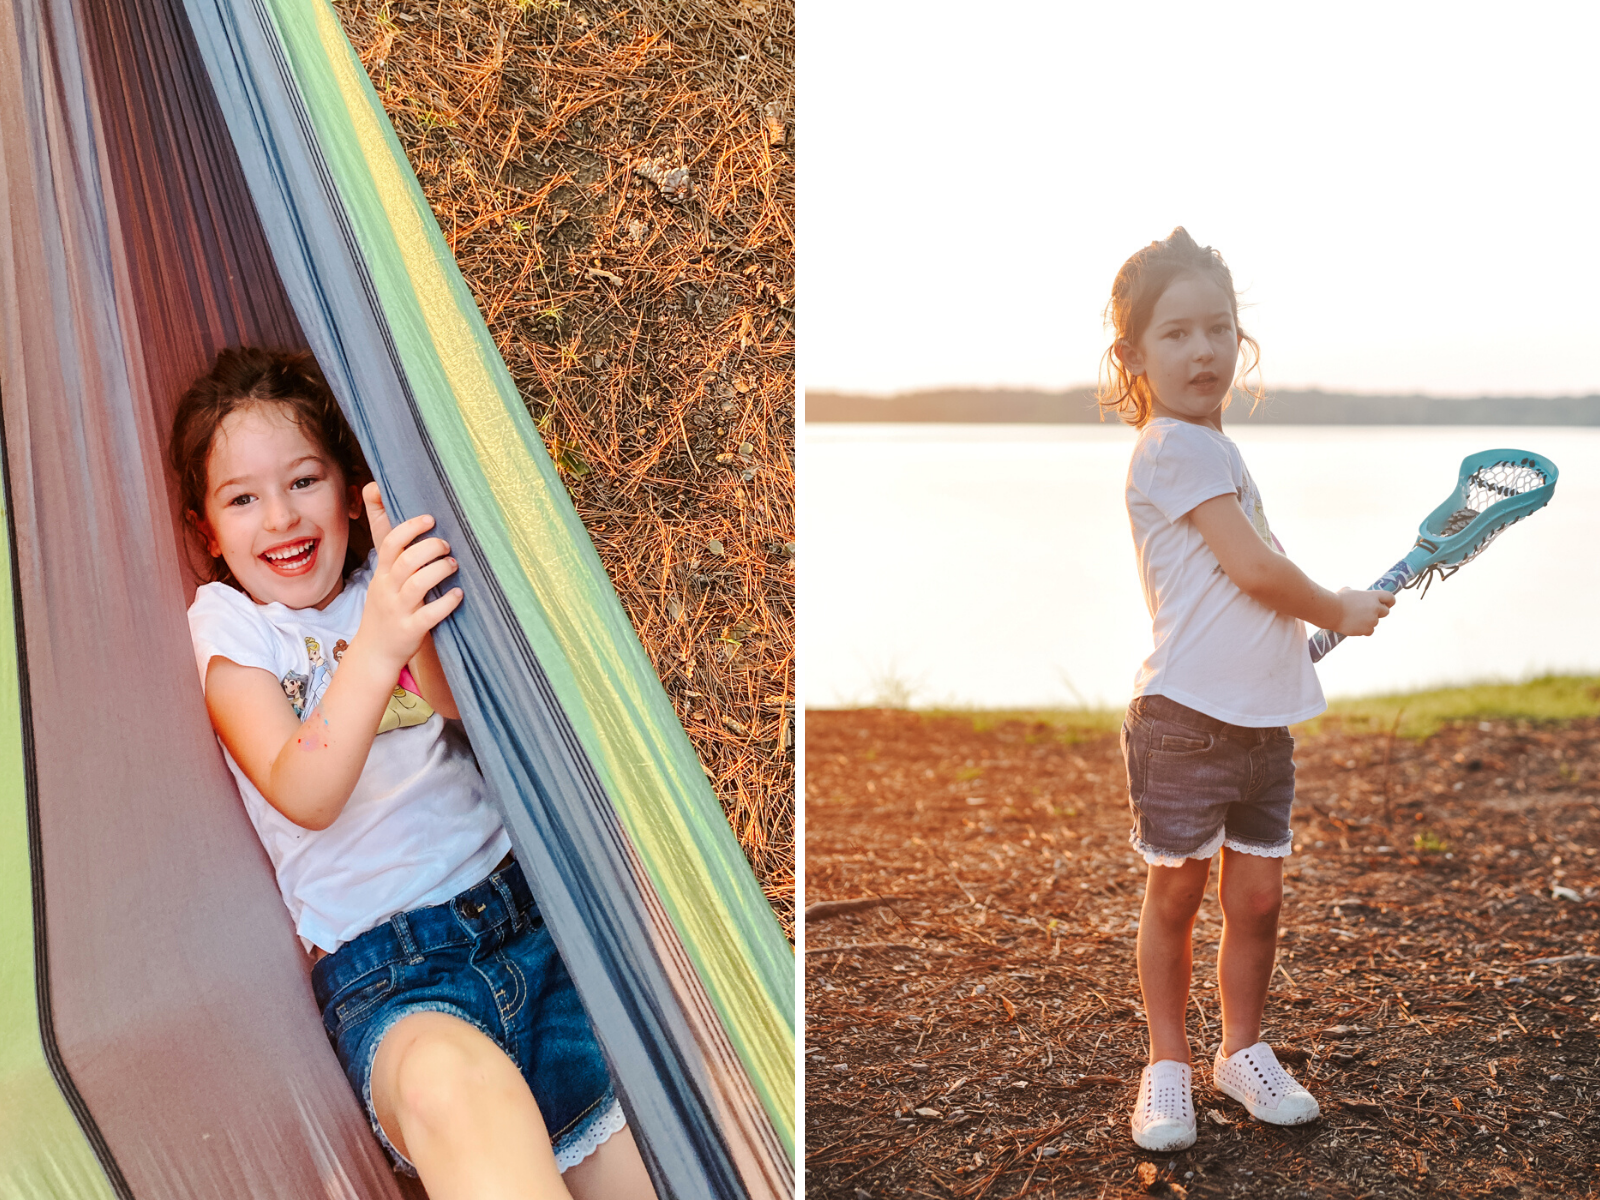 Camping With Kids by popular Memphis lifestyle blog, Lone Star Looking Glass: collage image of a young girl sitting in a hammock and playing with a lacrosse stick. 